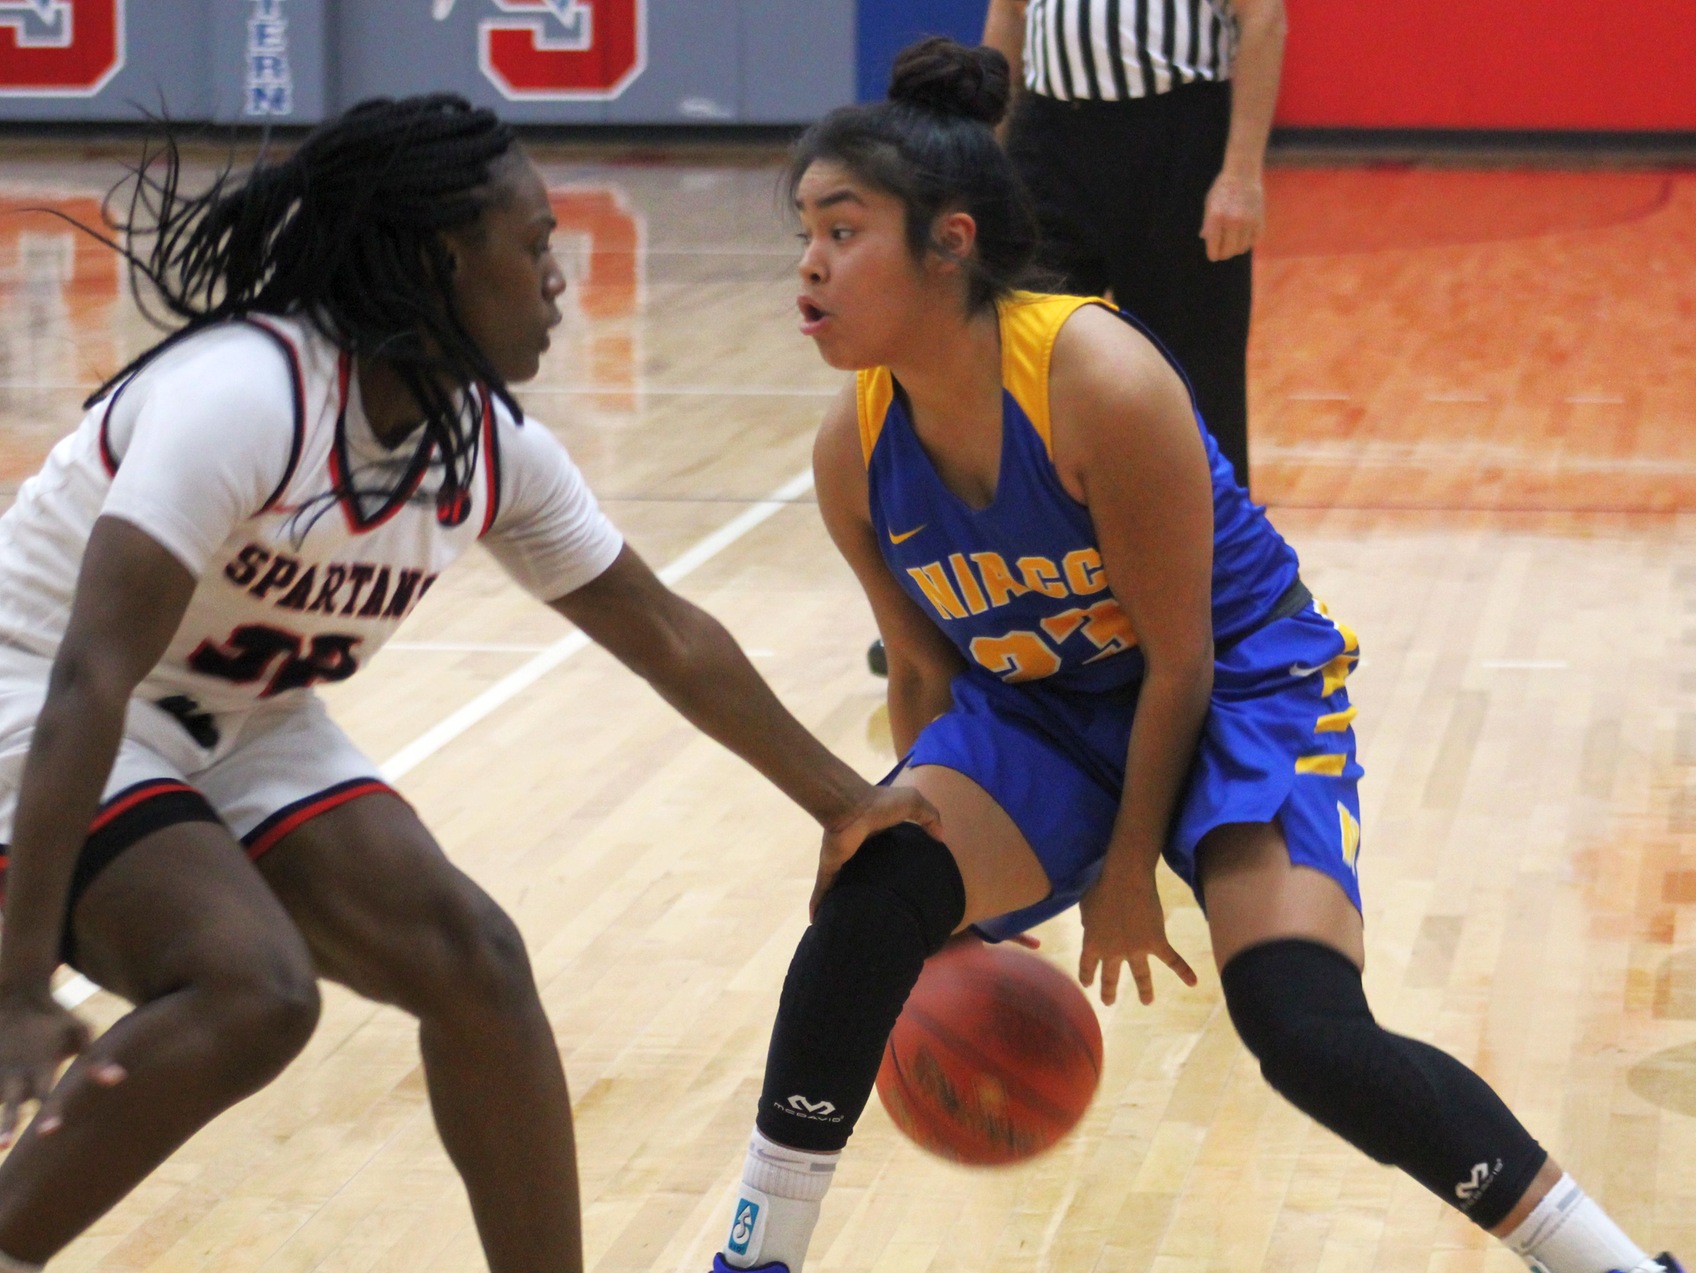 Shinaana Secody looks to drive during last week's game at Southwestern.